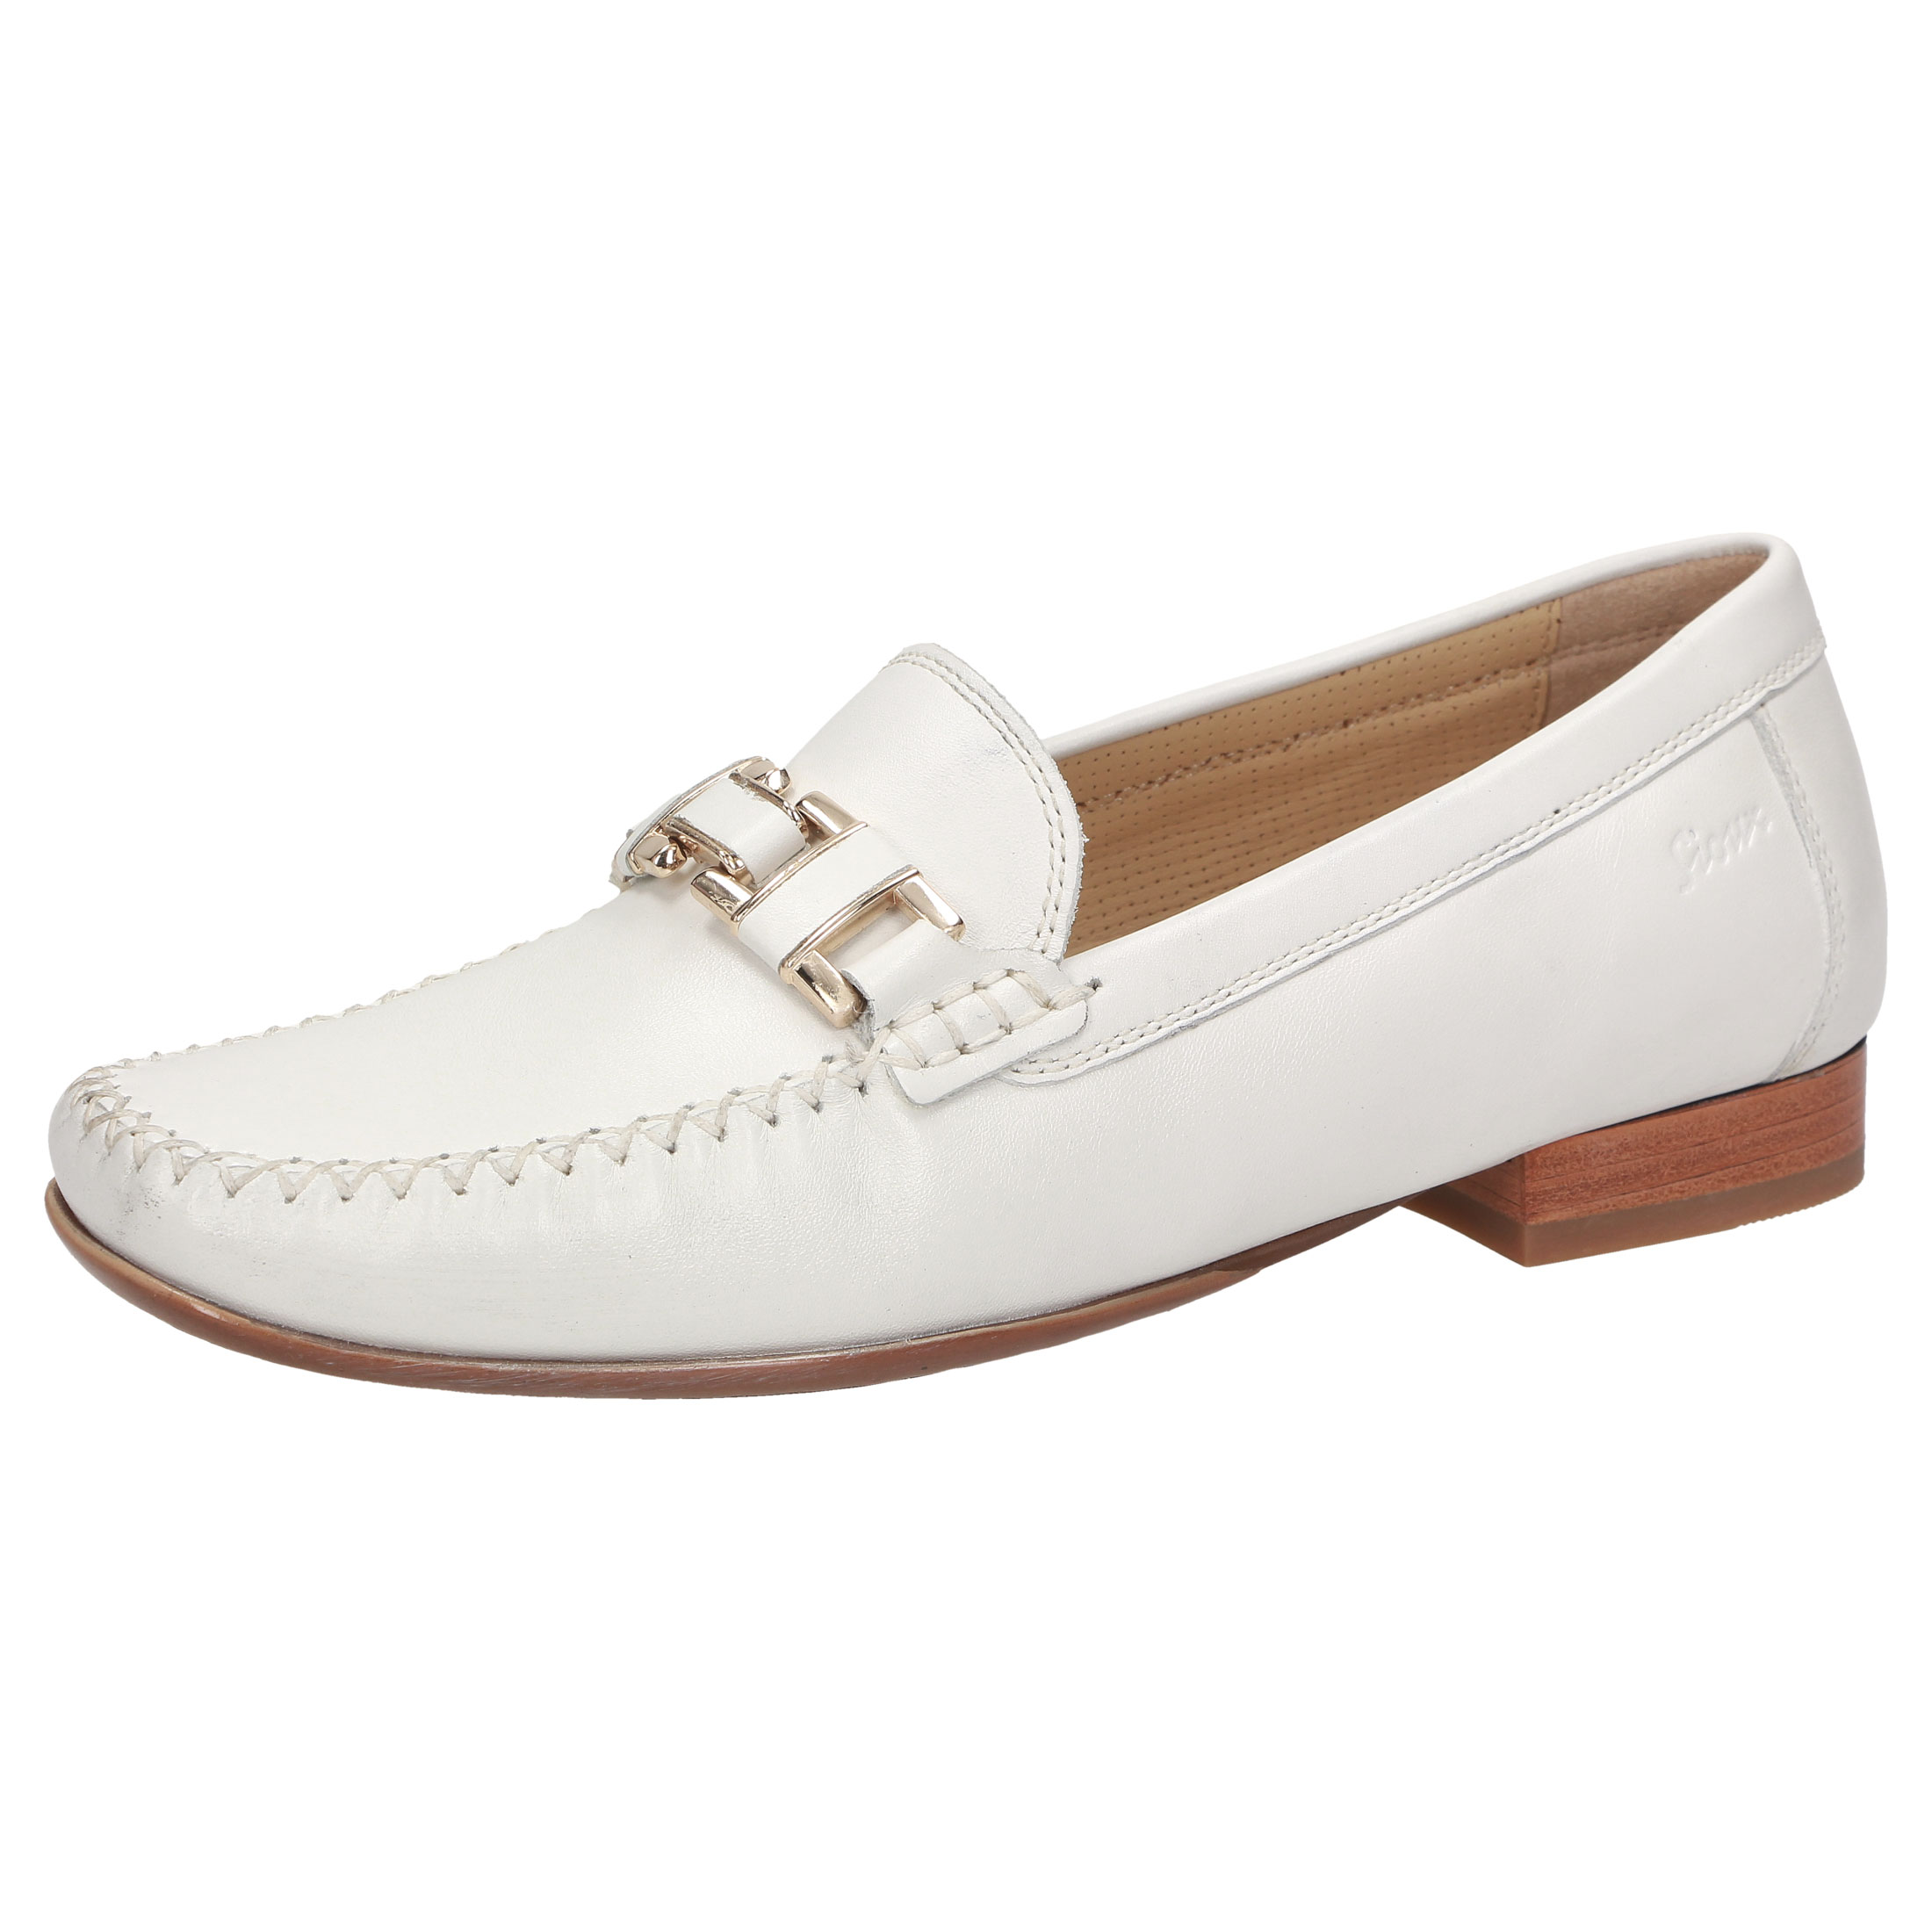 Cambria - White smooth leather